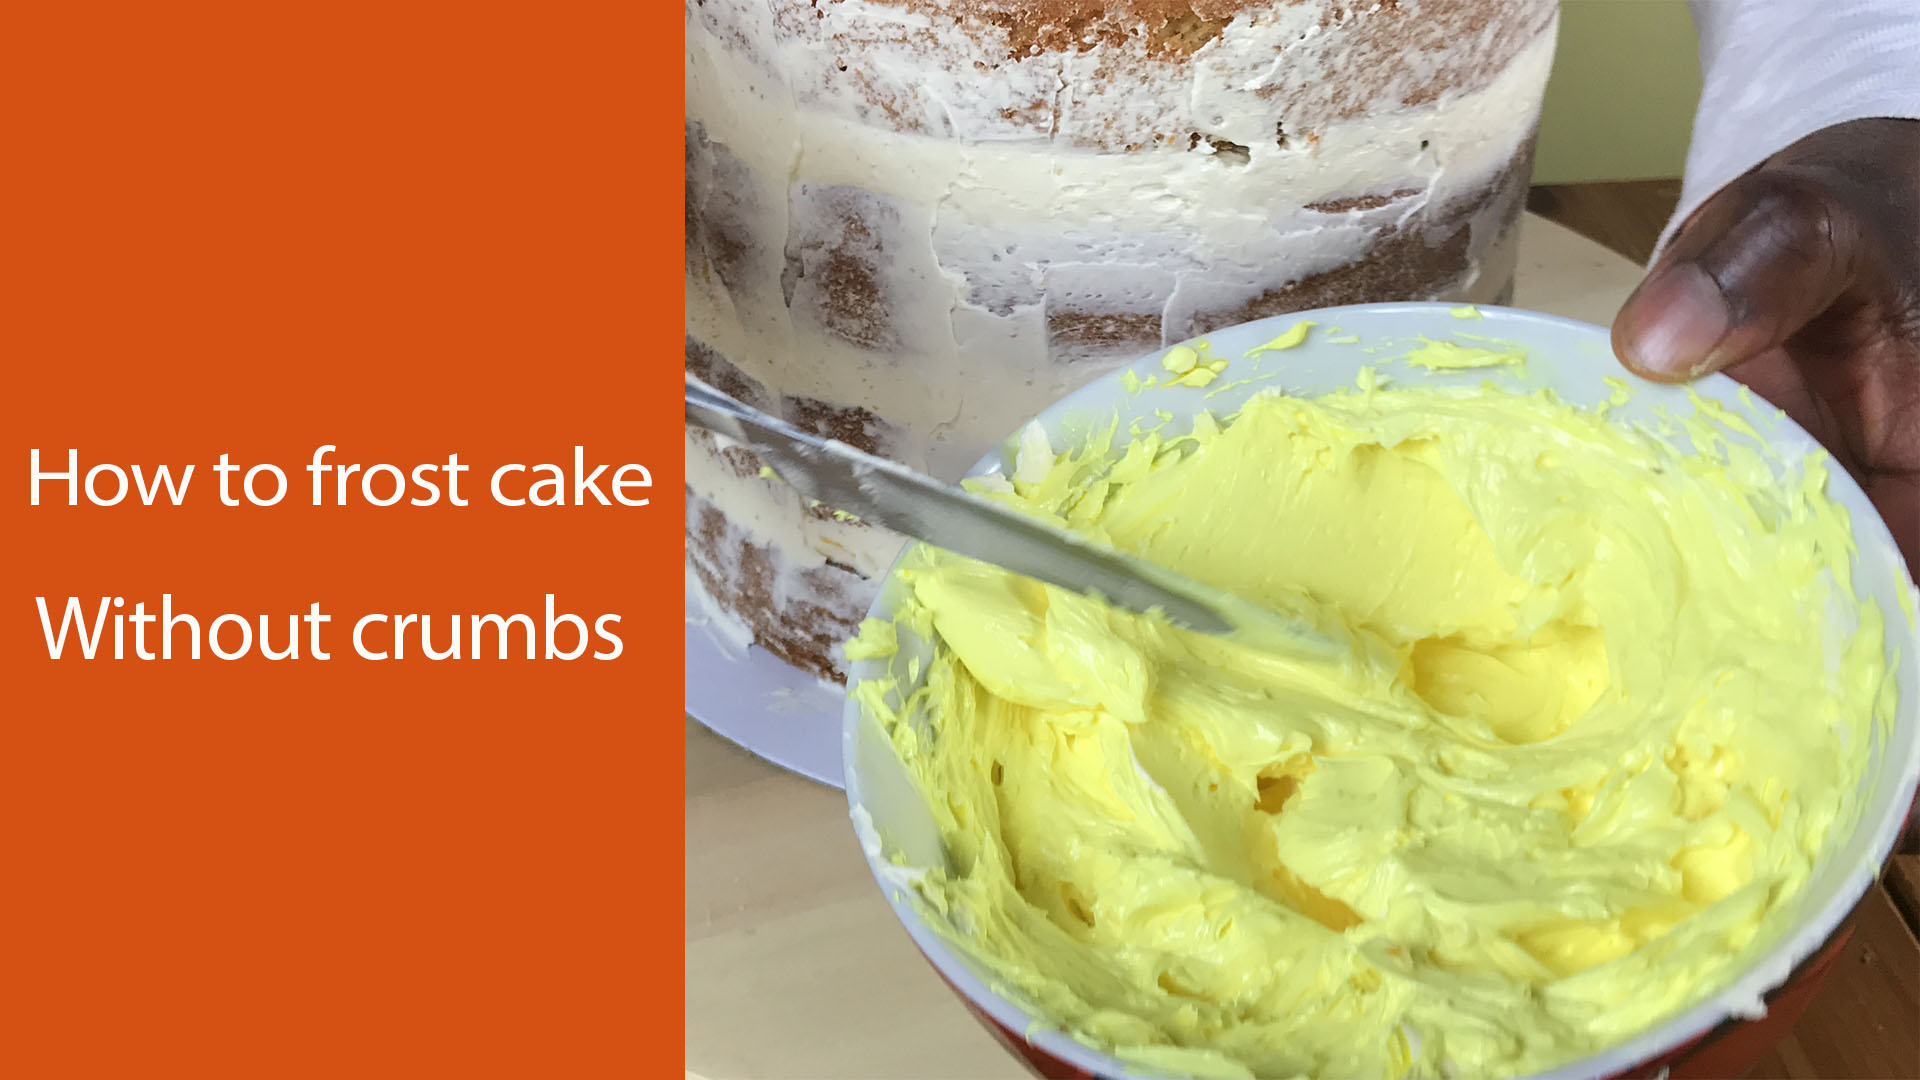 How to frost cake without crumbs